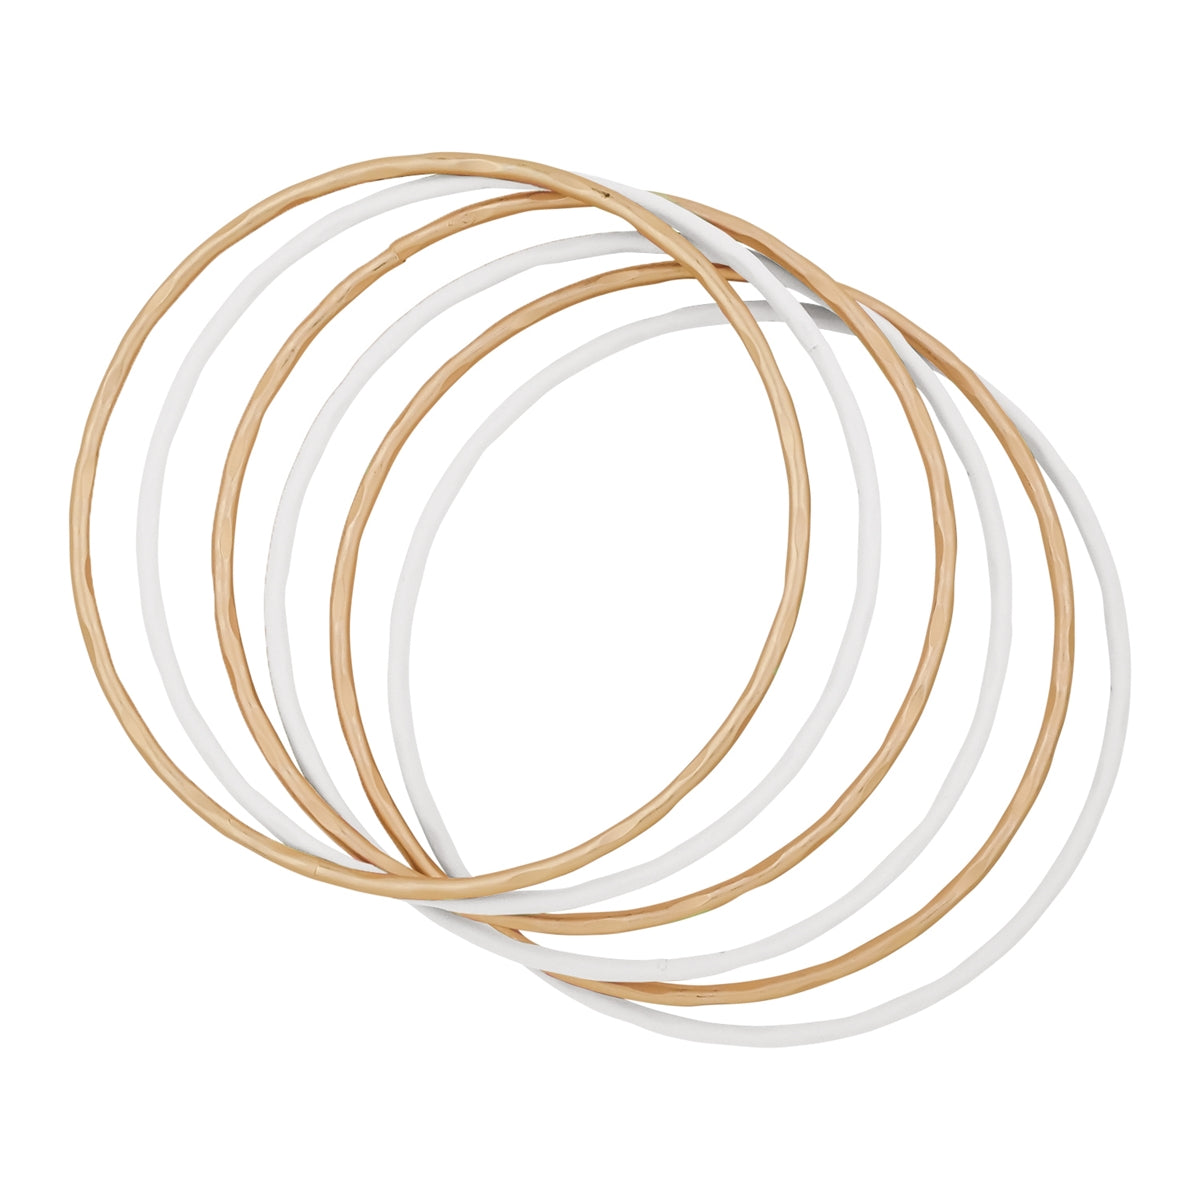 Color Coated and Metal Gold Bangles Set of 6